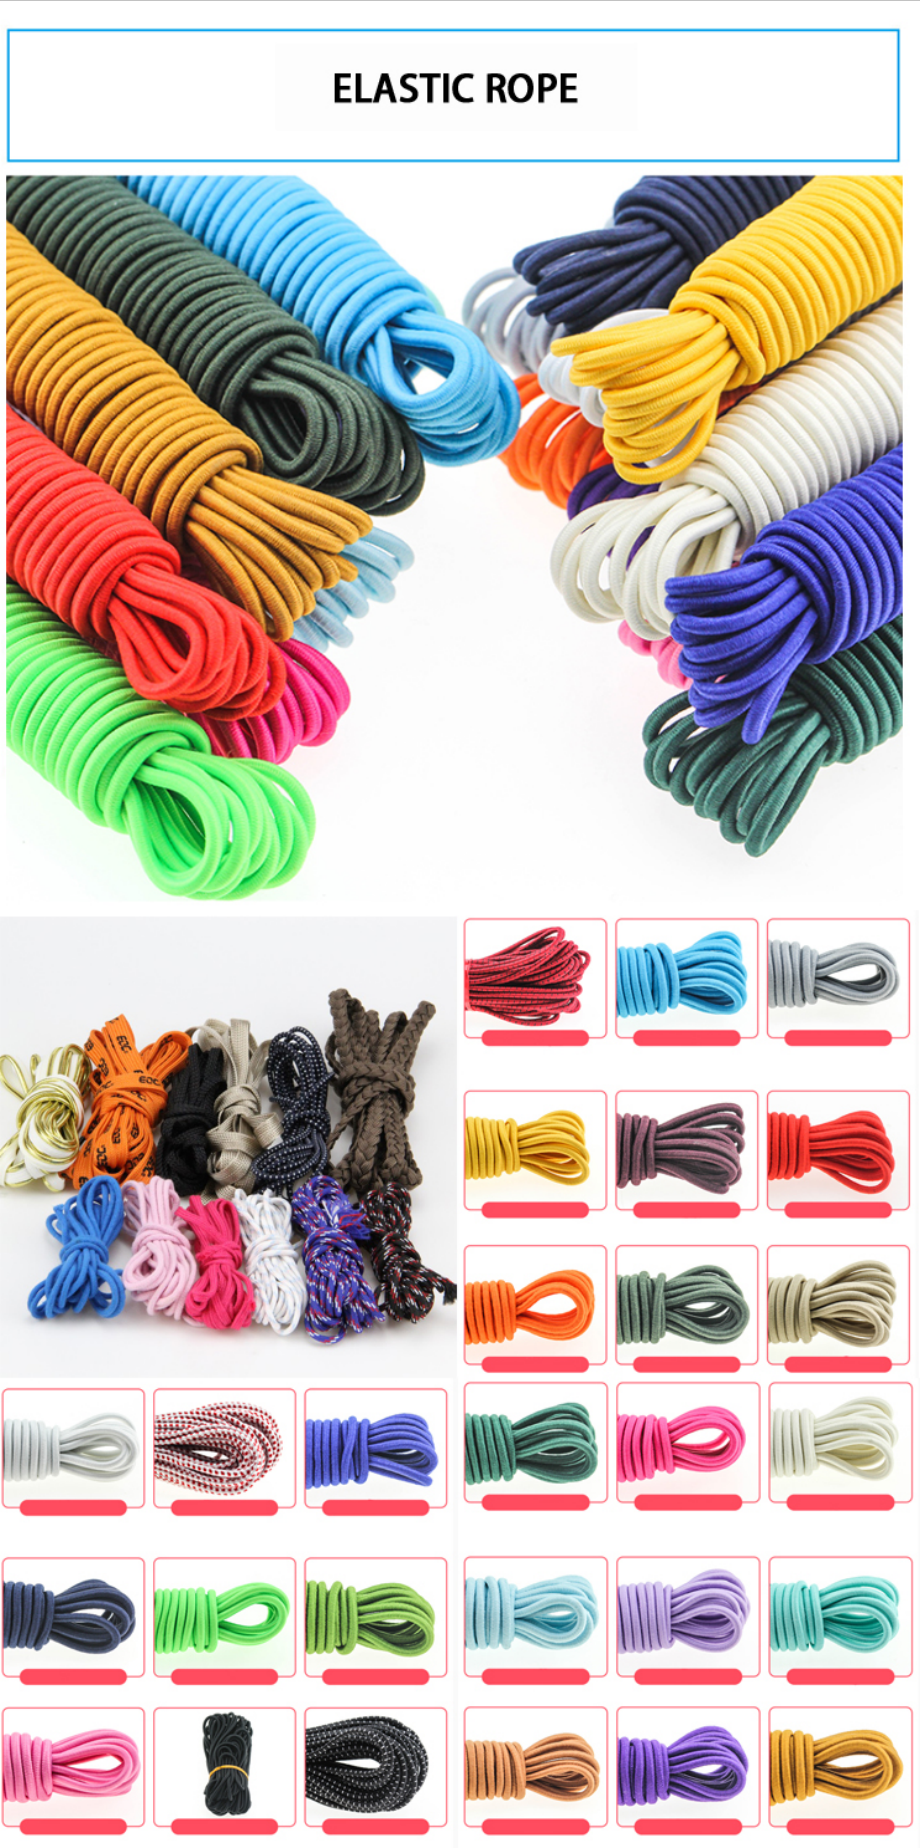 China Rubber Rope, Rubber Rope Wholesale, Manufacturers, Price